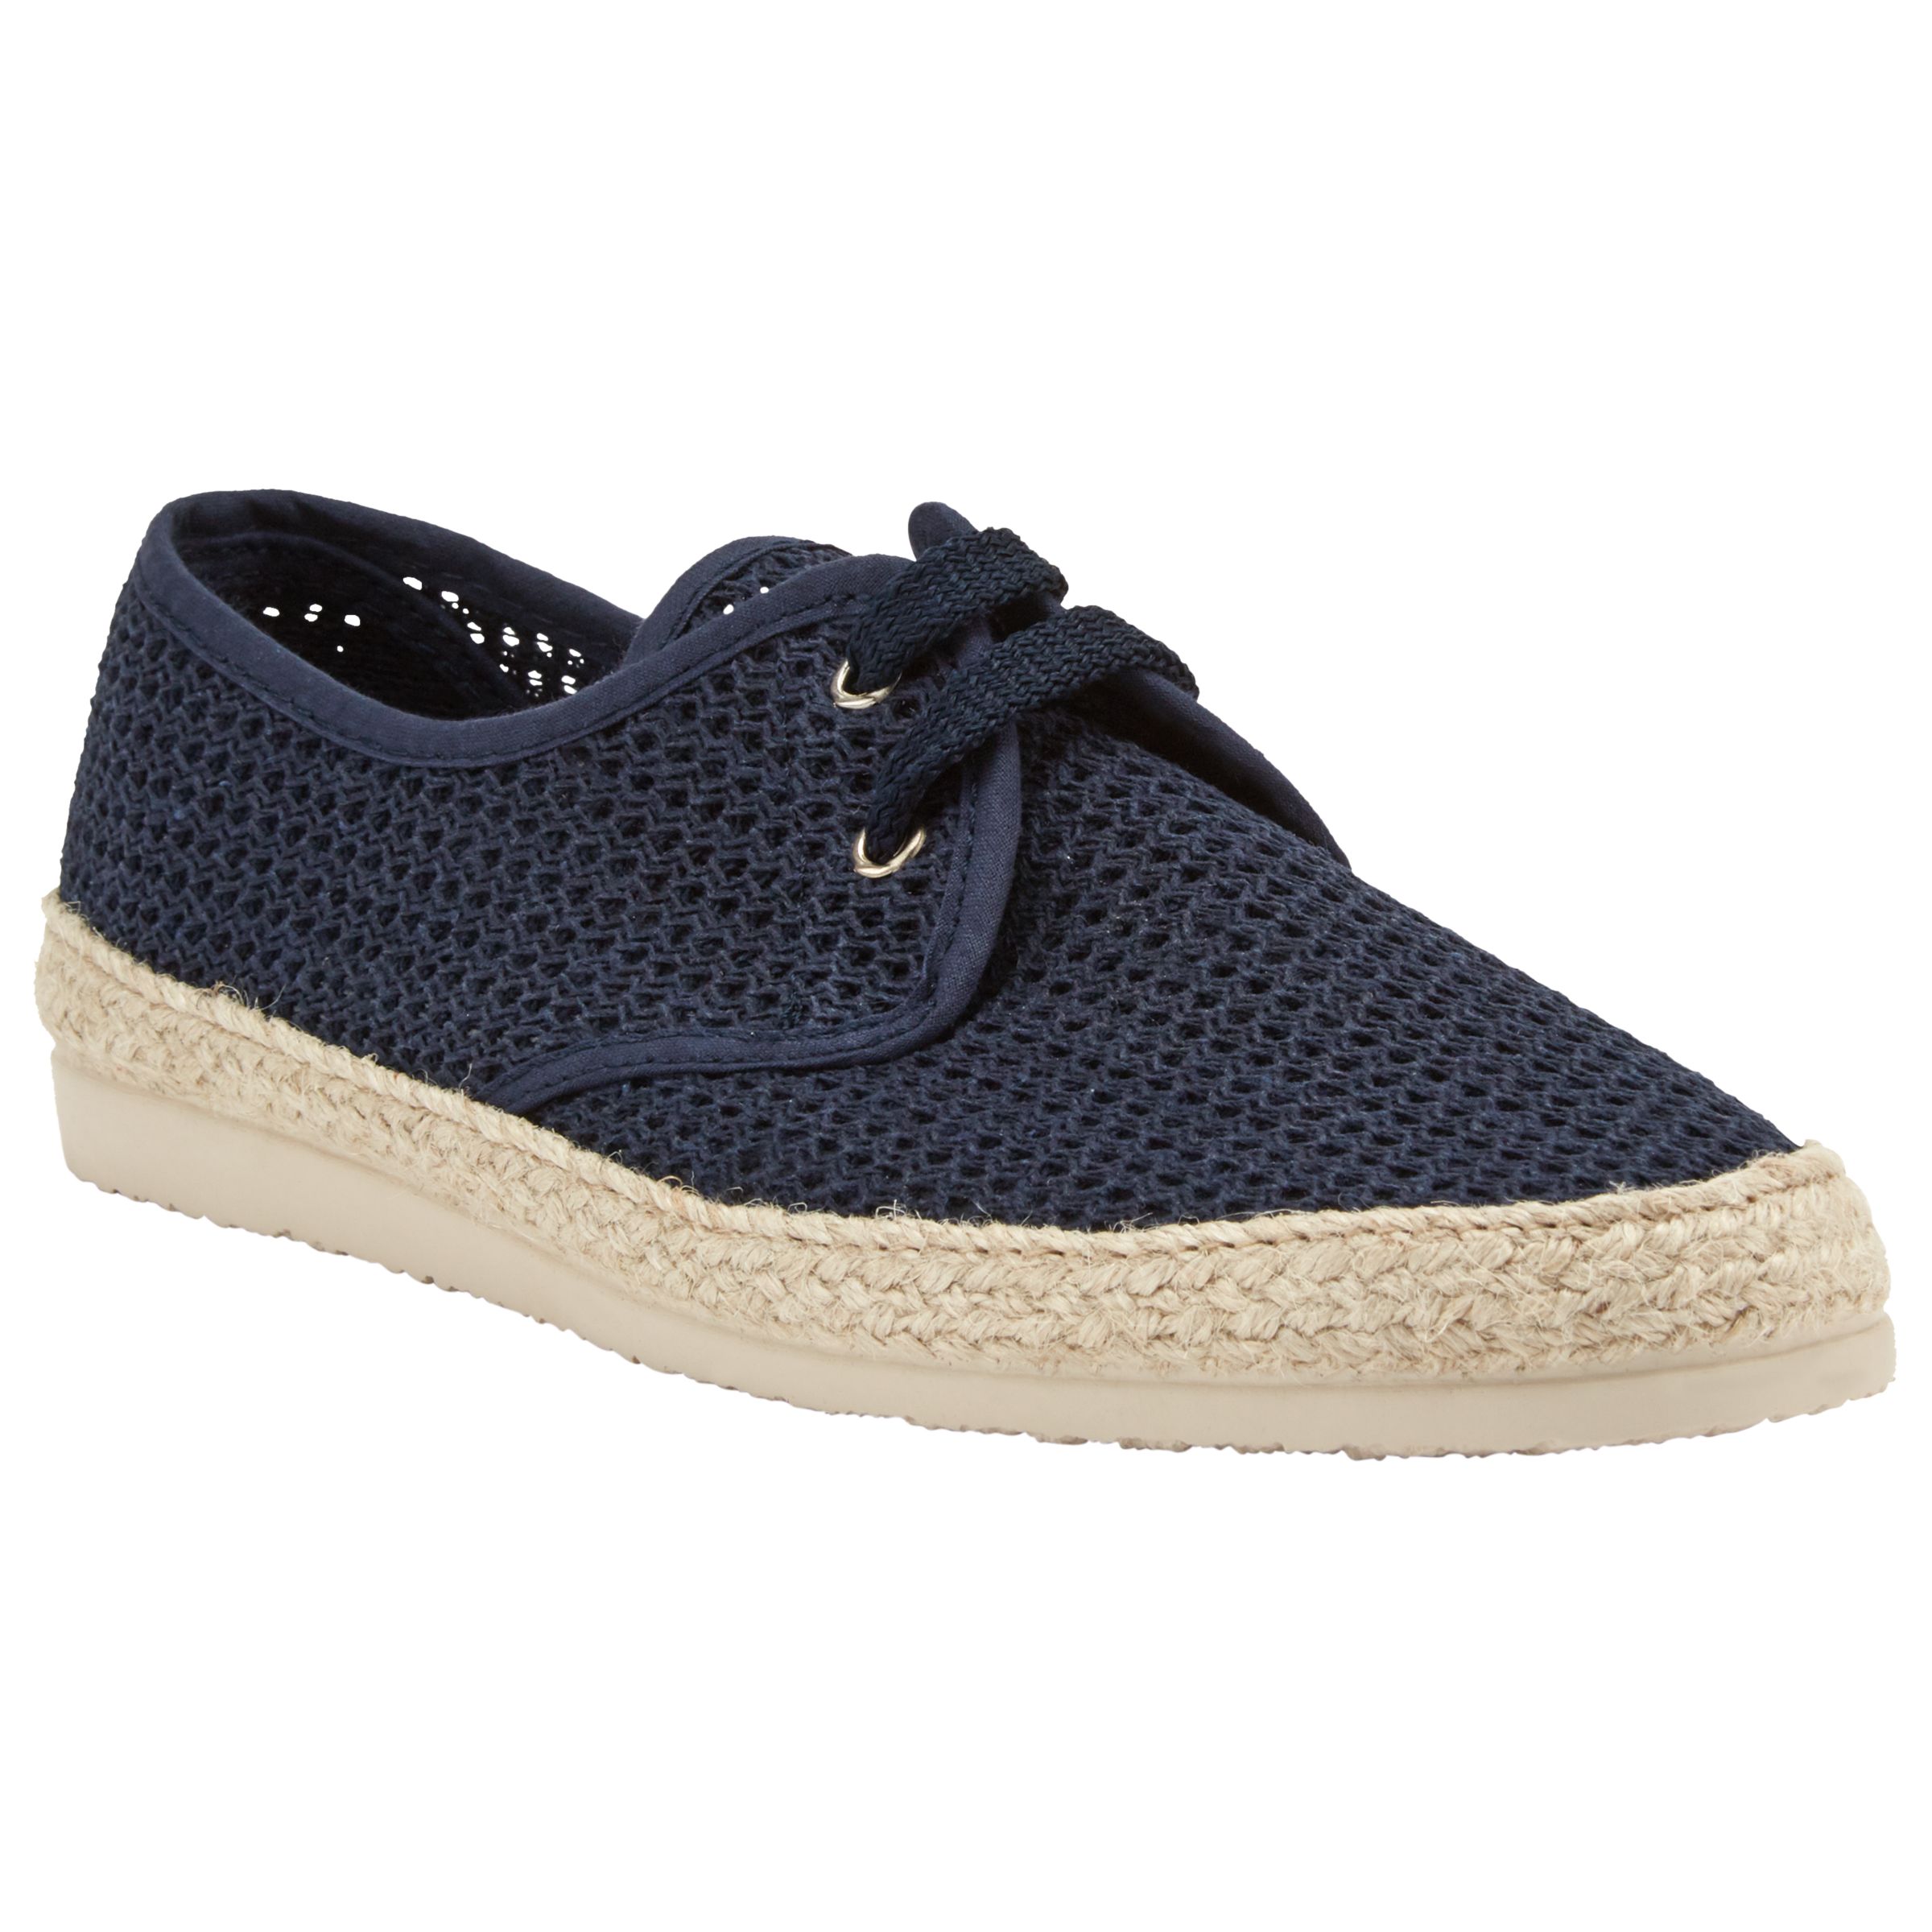 Kin Woven Lace Up Espadrilles, Navy, 8